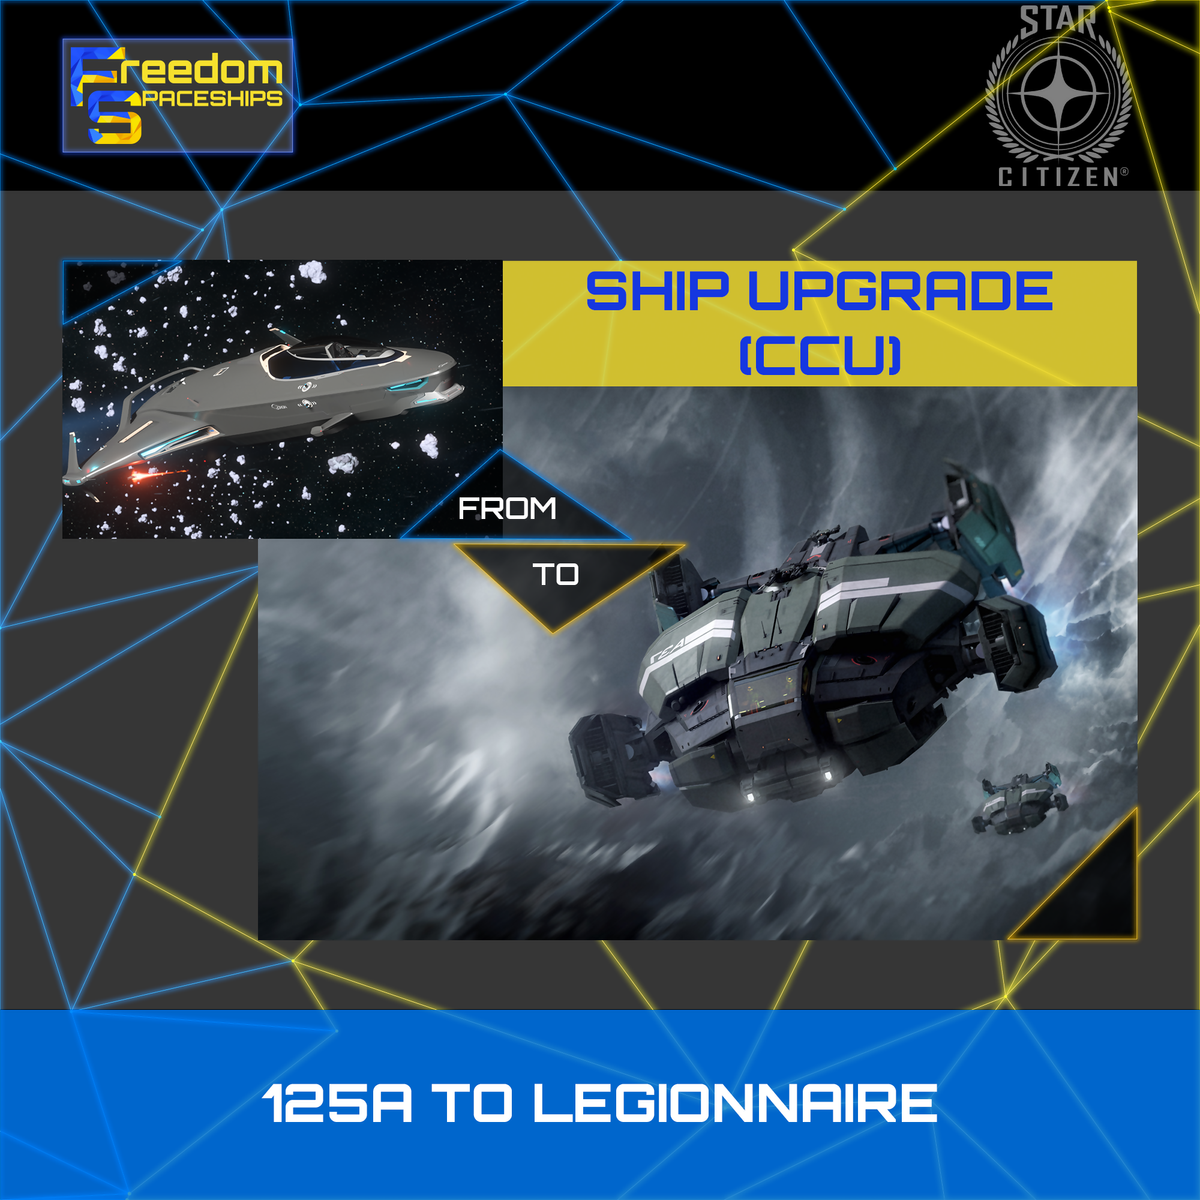 Upgrade - 125A to Legionnaire